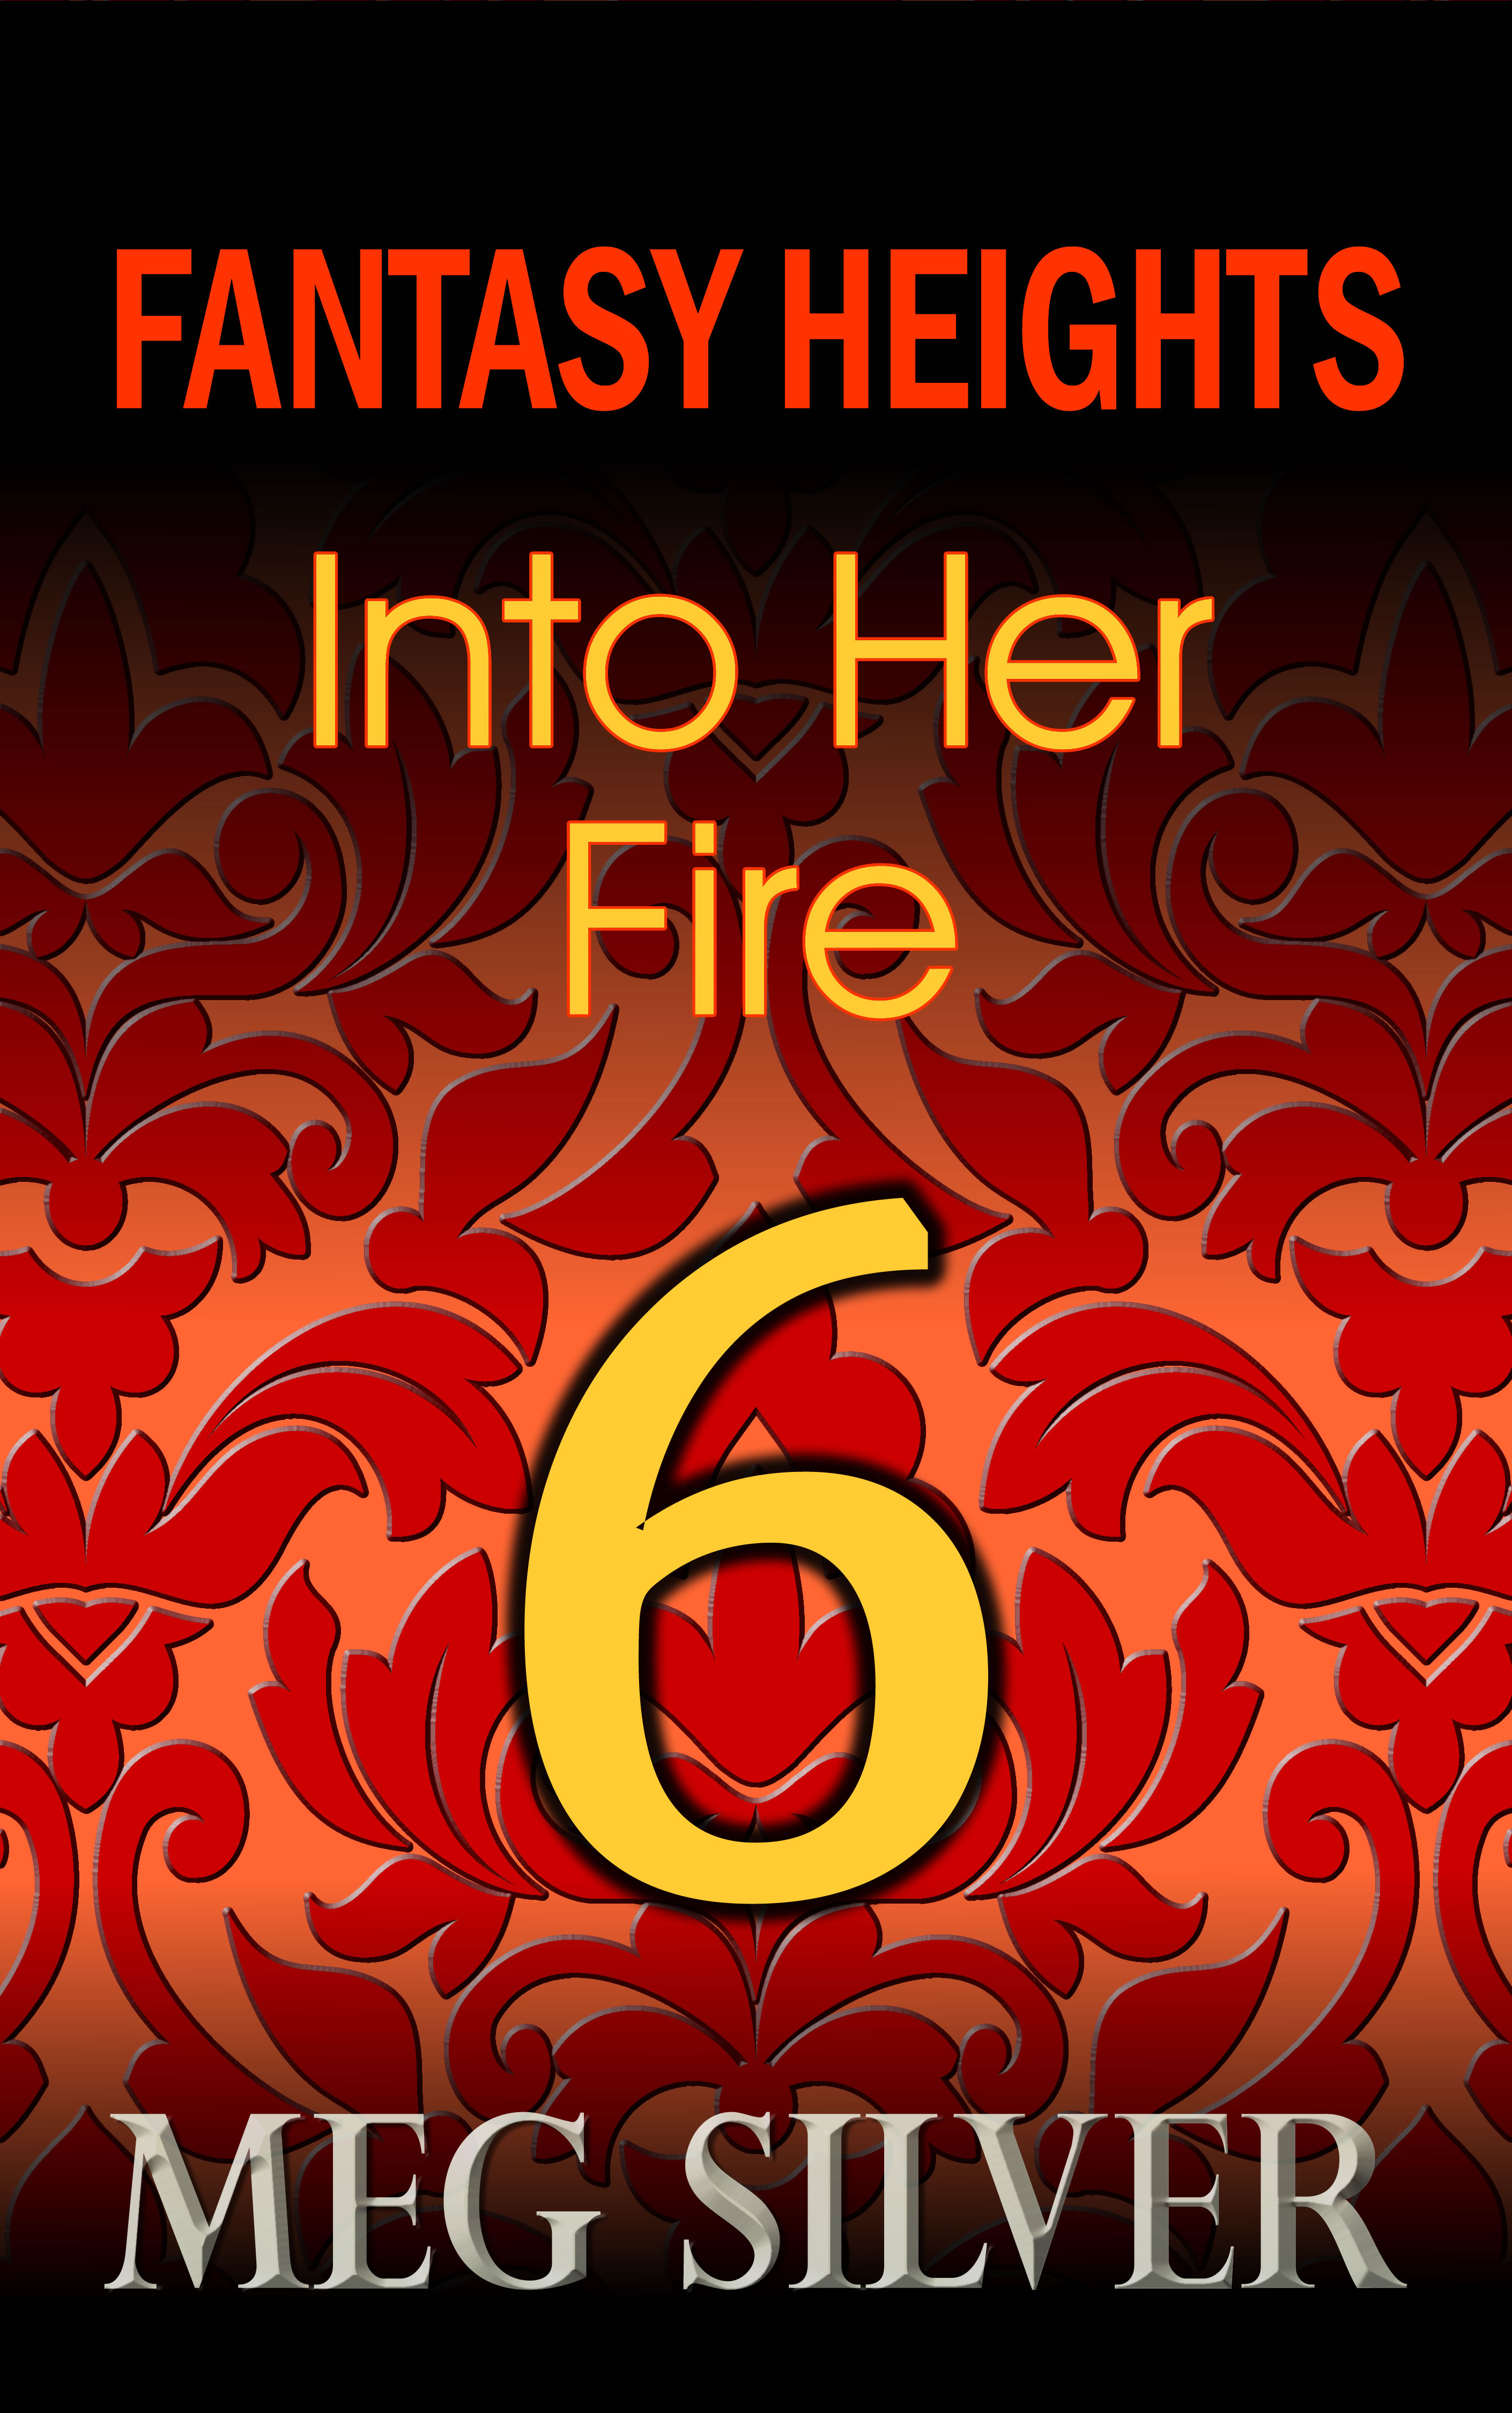 Fantasy Heights Episode 6: Into Her Fire